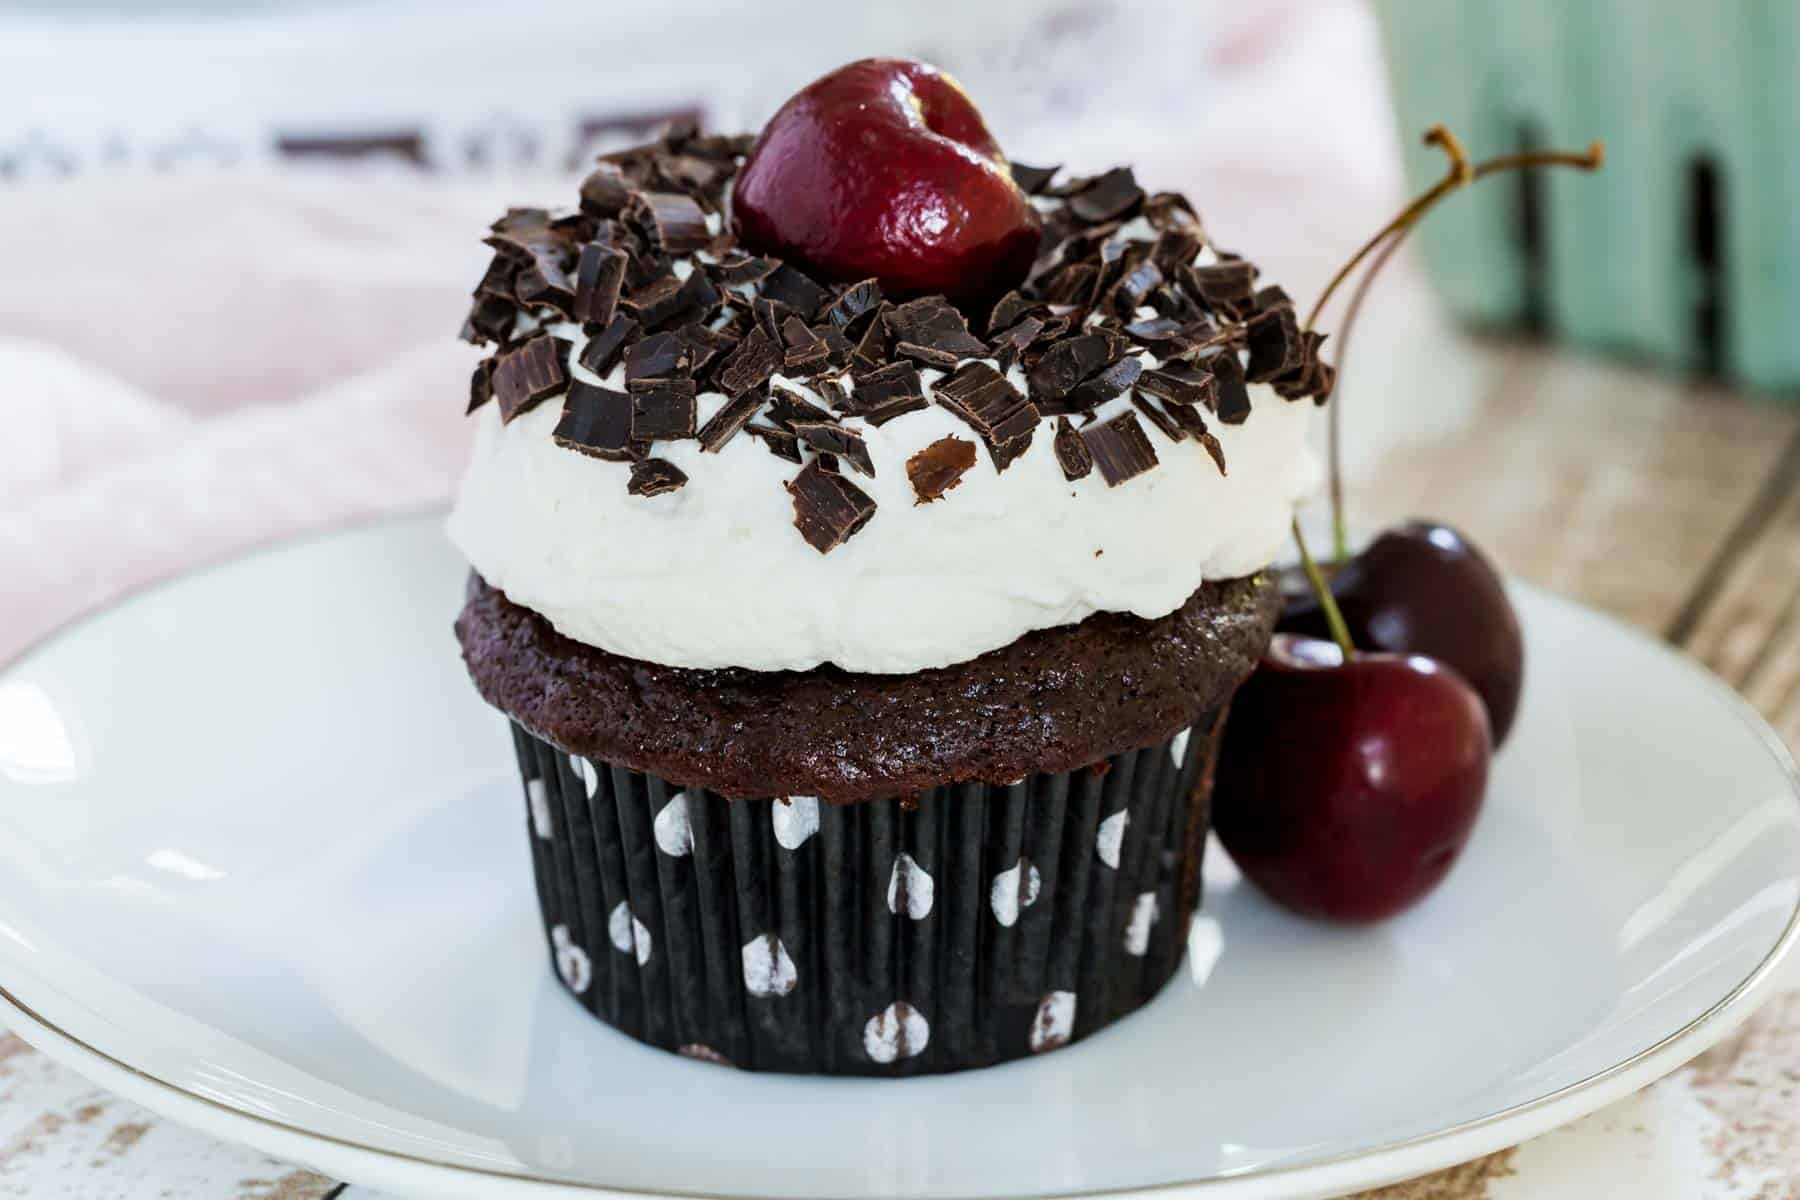 A black forest cupcake with a cherry next to it is on a white plate.